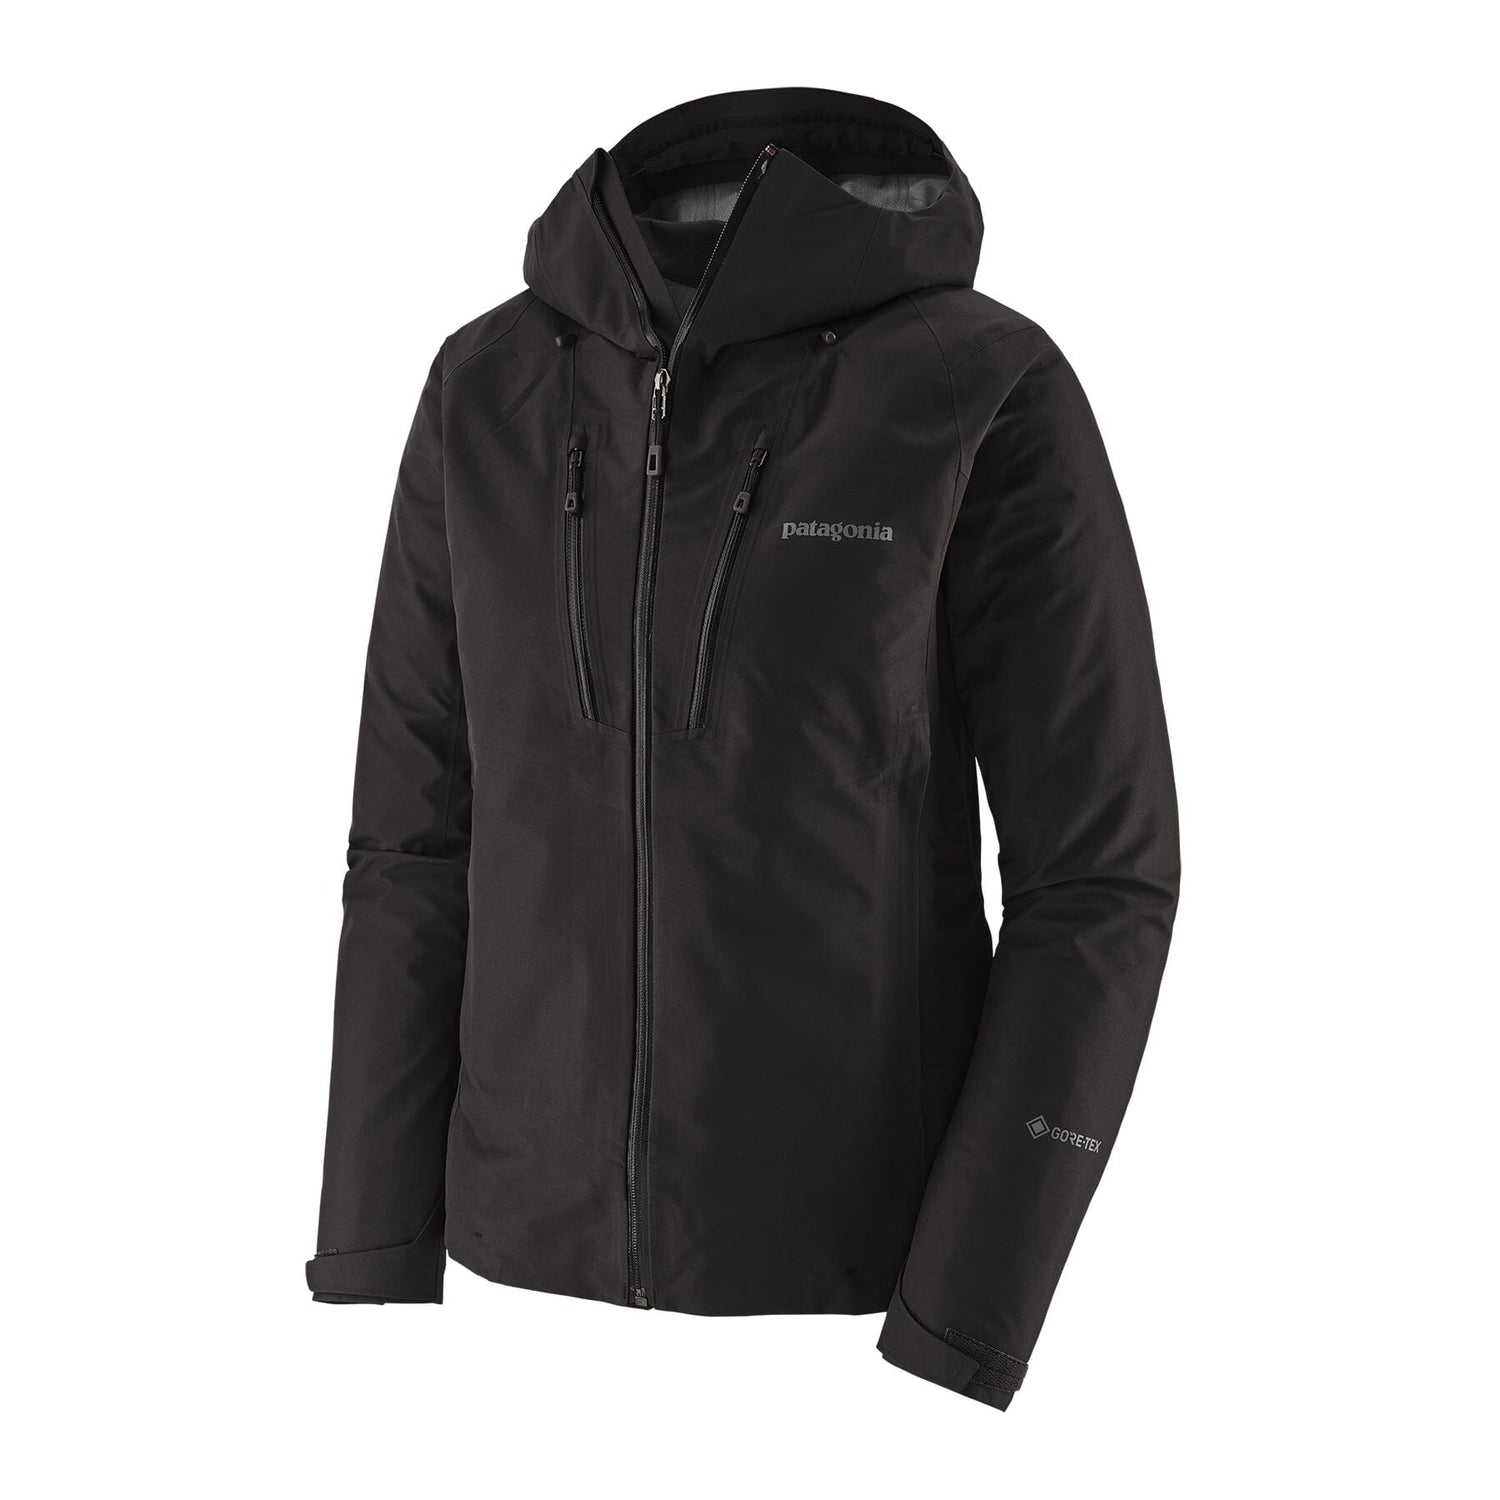 Patagonia - W's Triolet Shell Jacket - Recycled Polyester - Weekendbee - sustainable sportswear